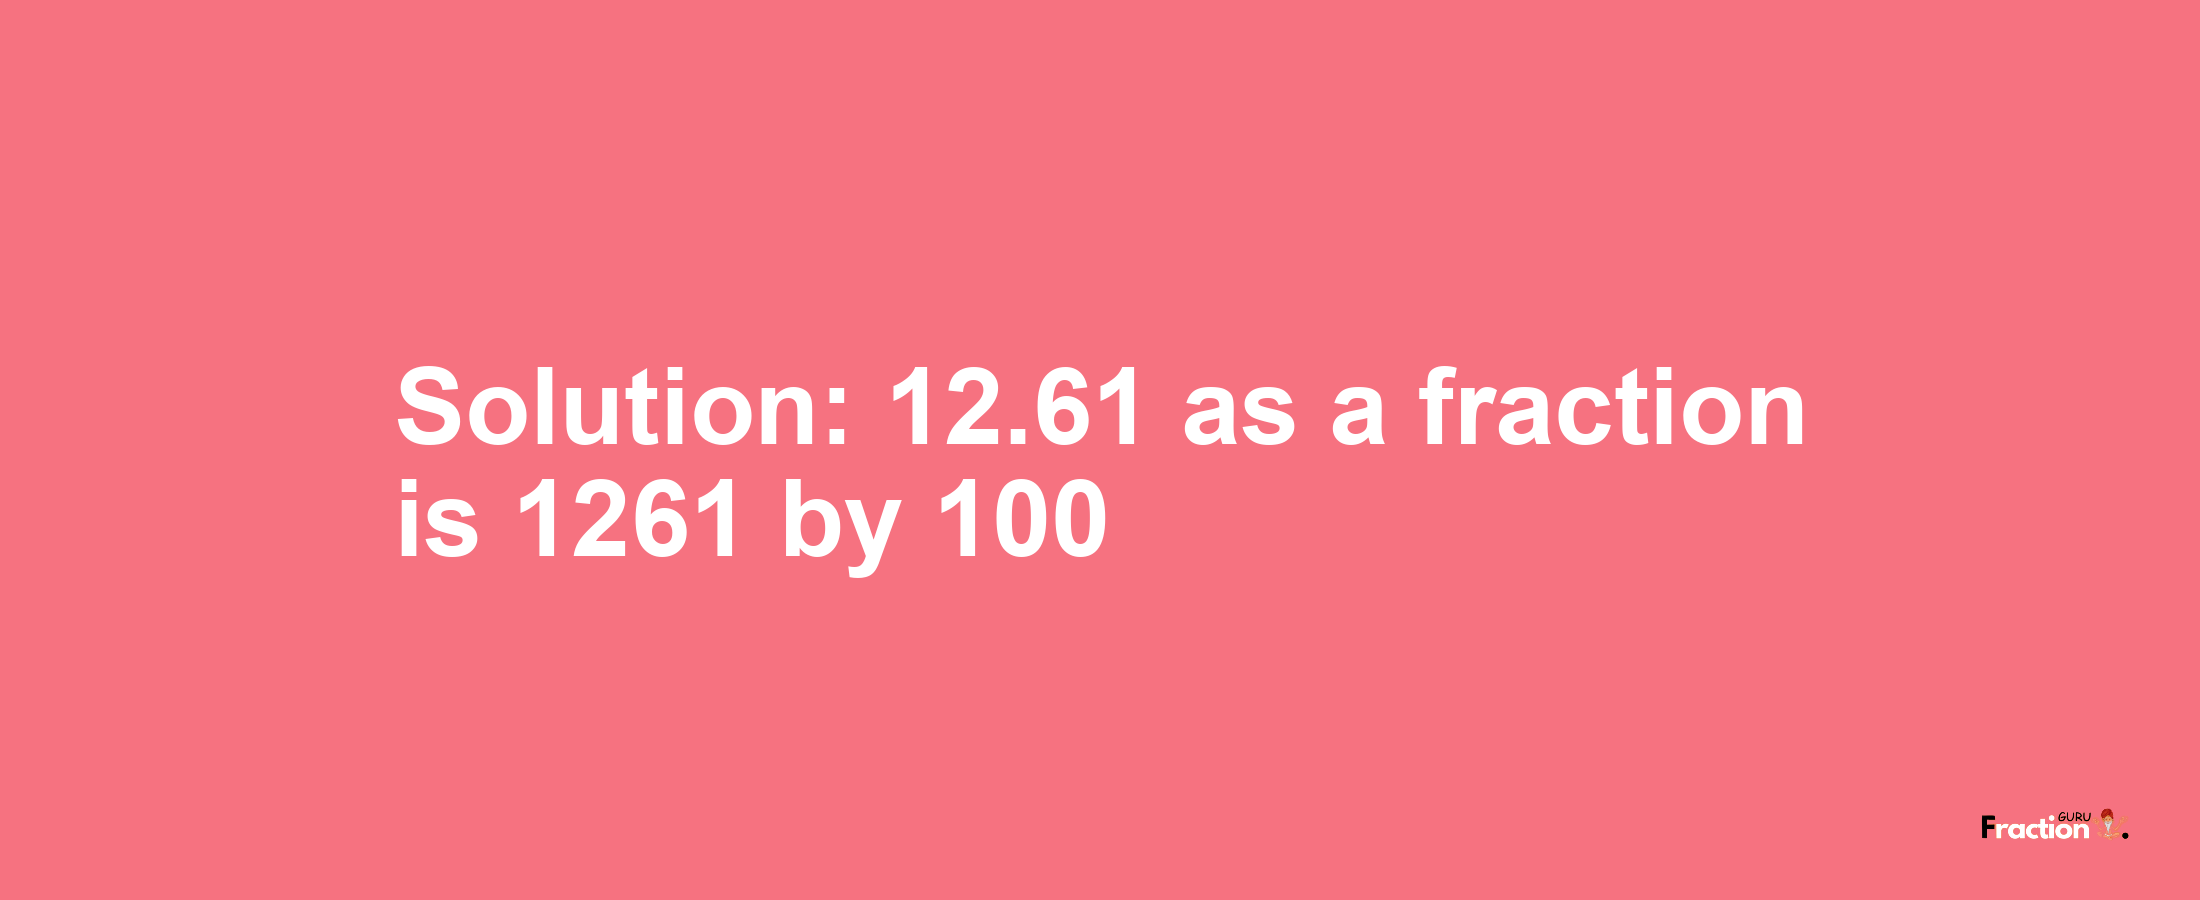 Solution:12.61 as a fraction is 1261/100